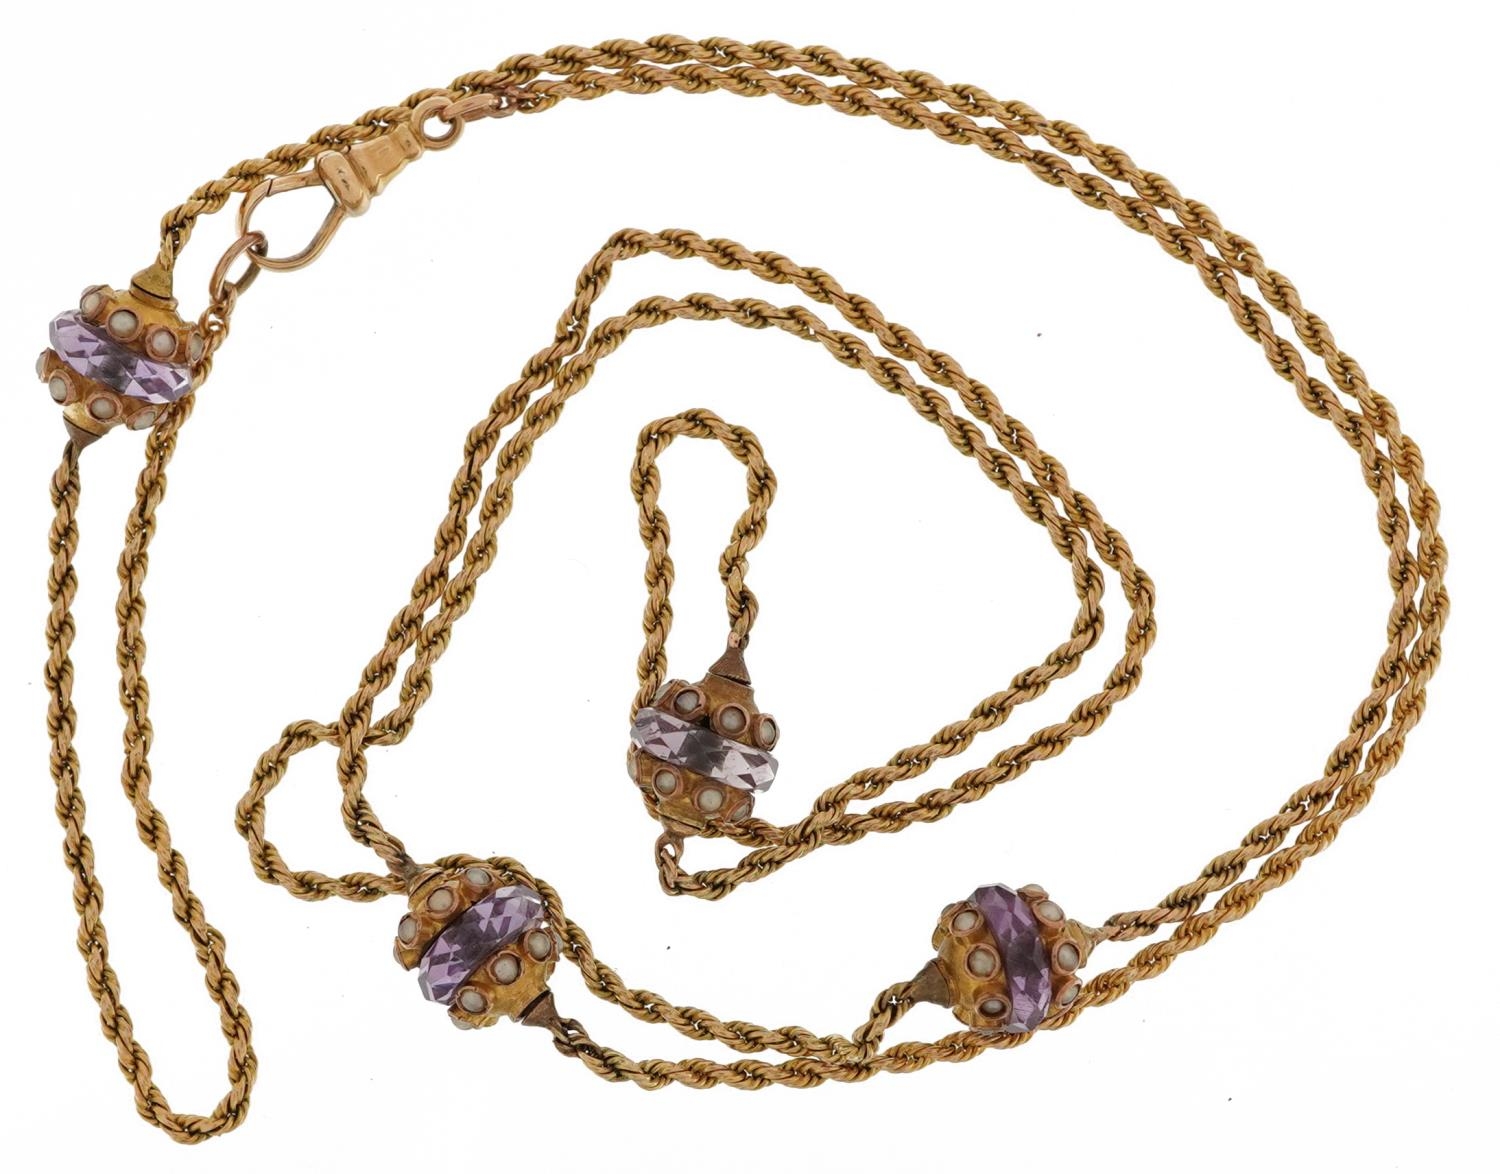 Unmarked gold amethyst and seed pearl rope twist necklace, tests as 9ct gold, 60cm in length, 7.7g - Image 2 of 2